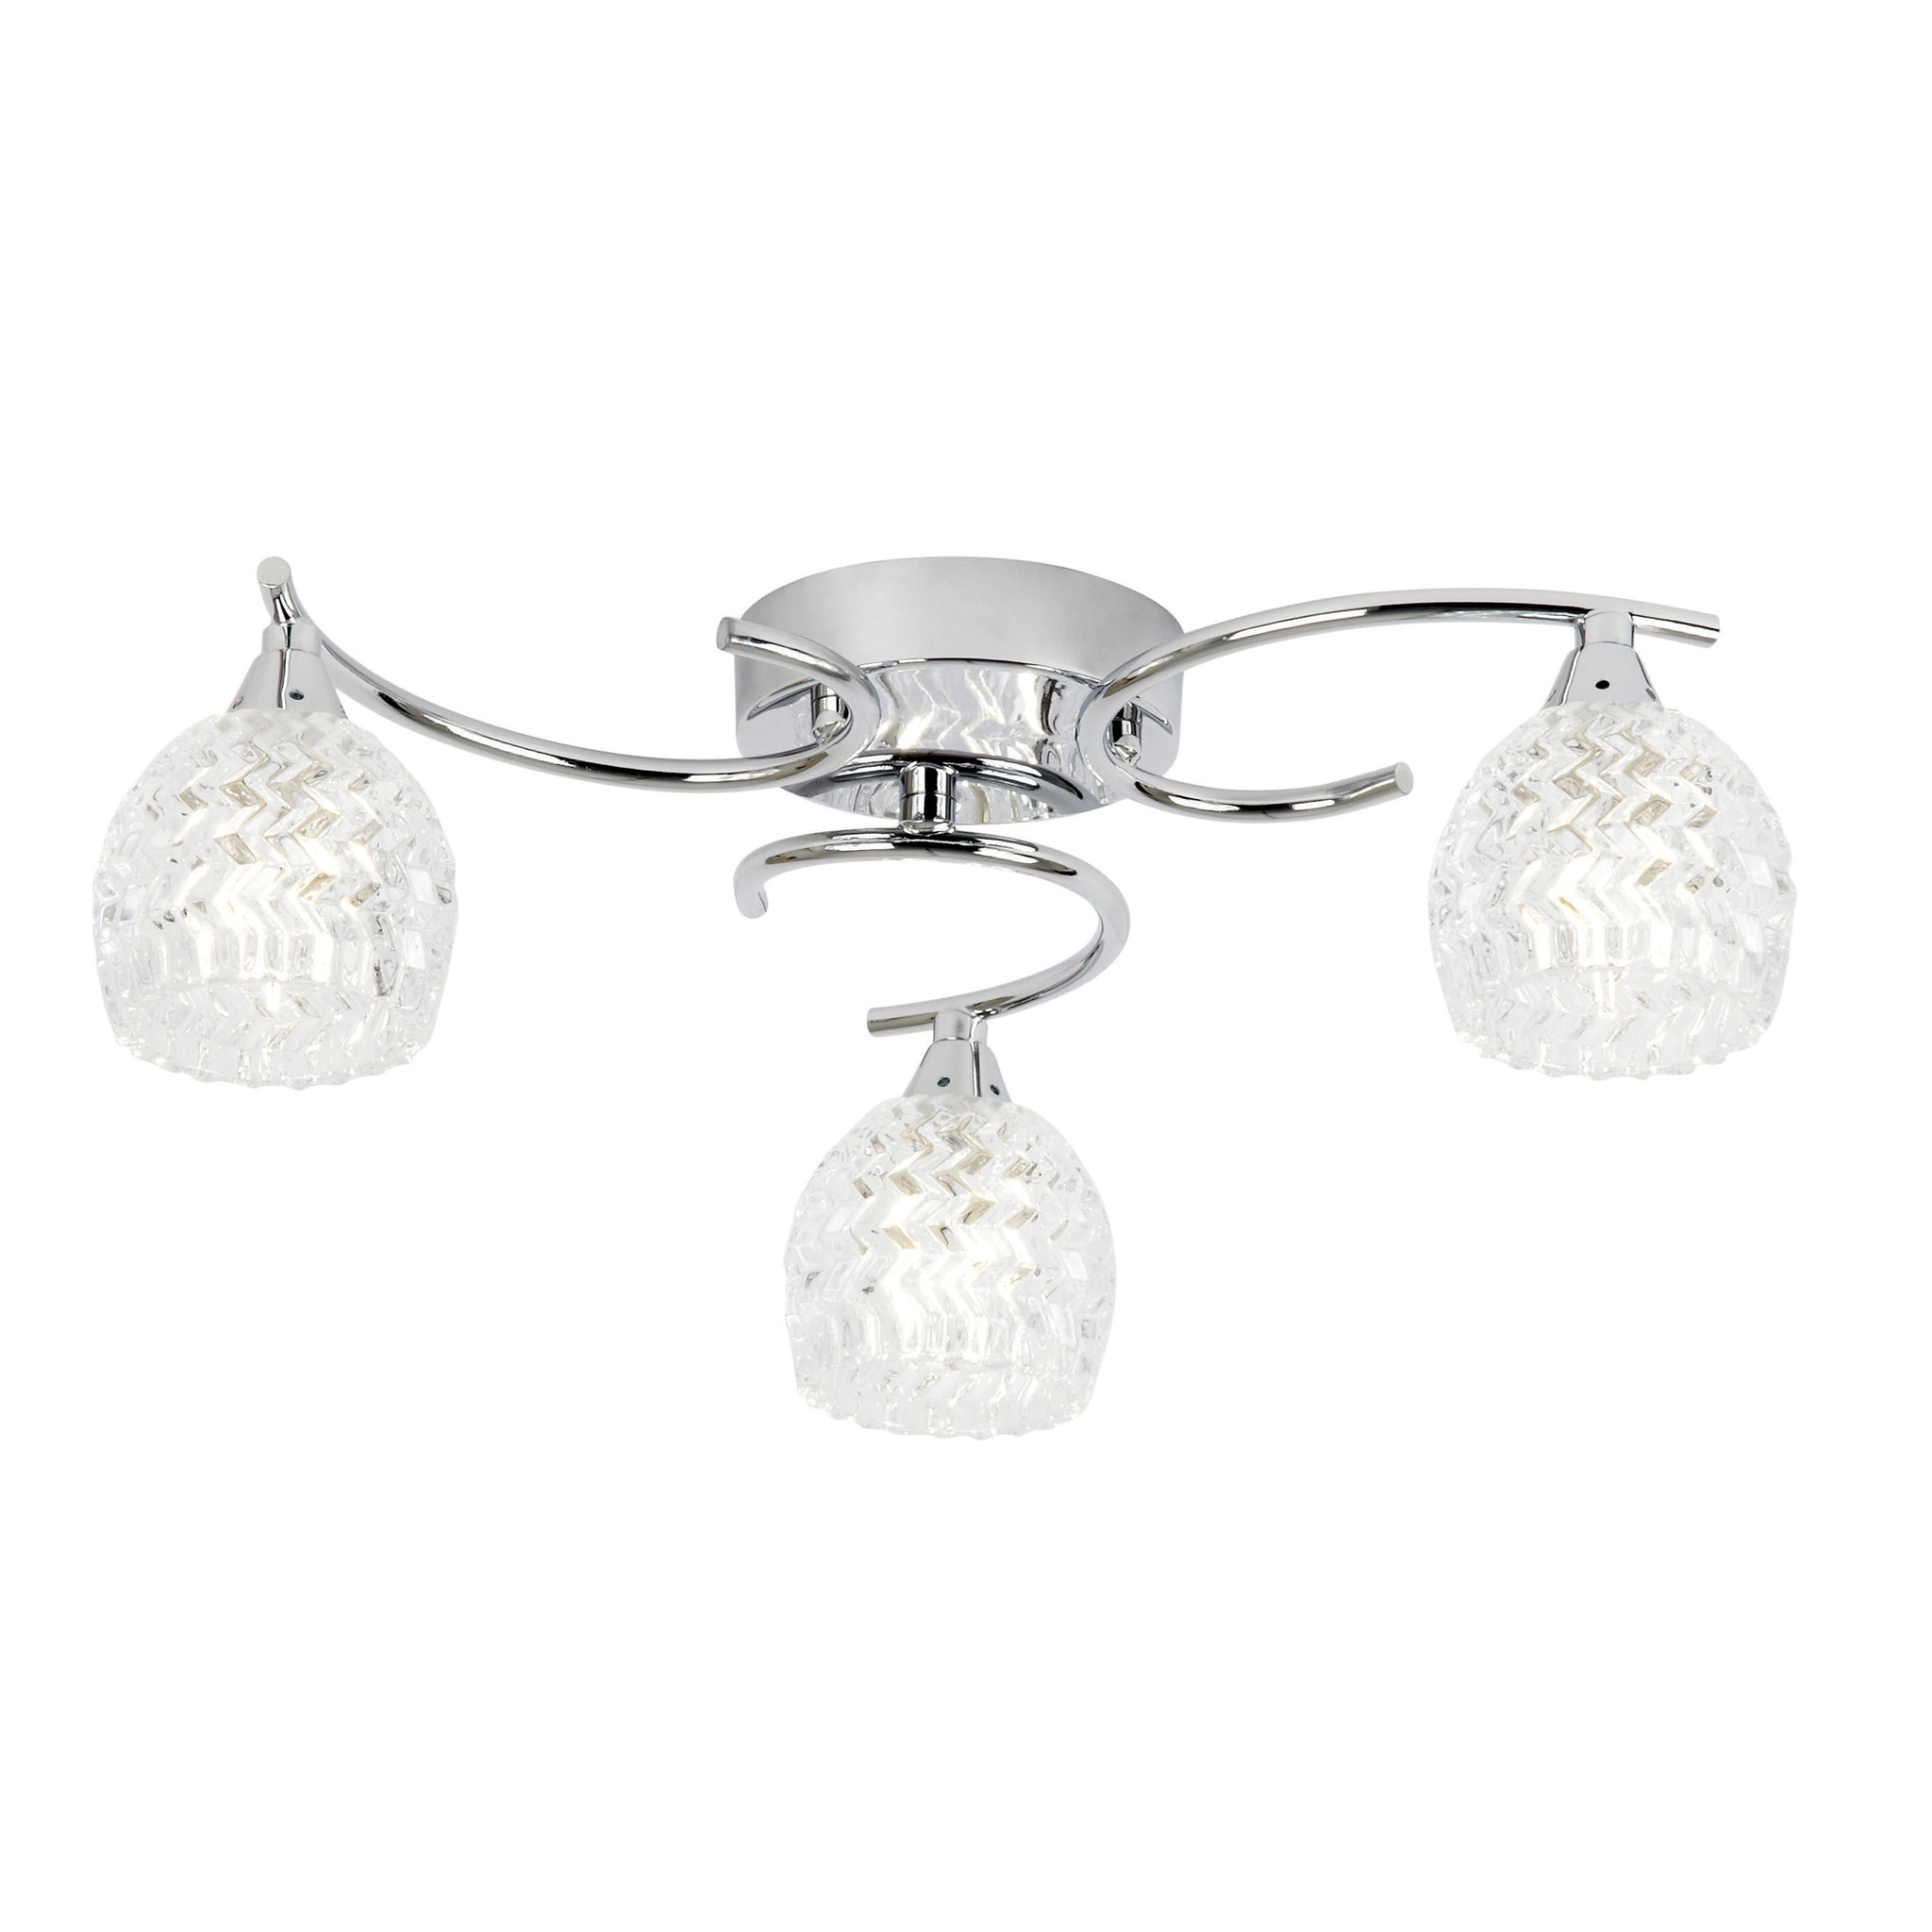 Bowyer 3 Ceiling Lamp Chrome